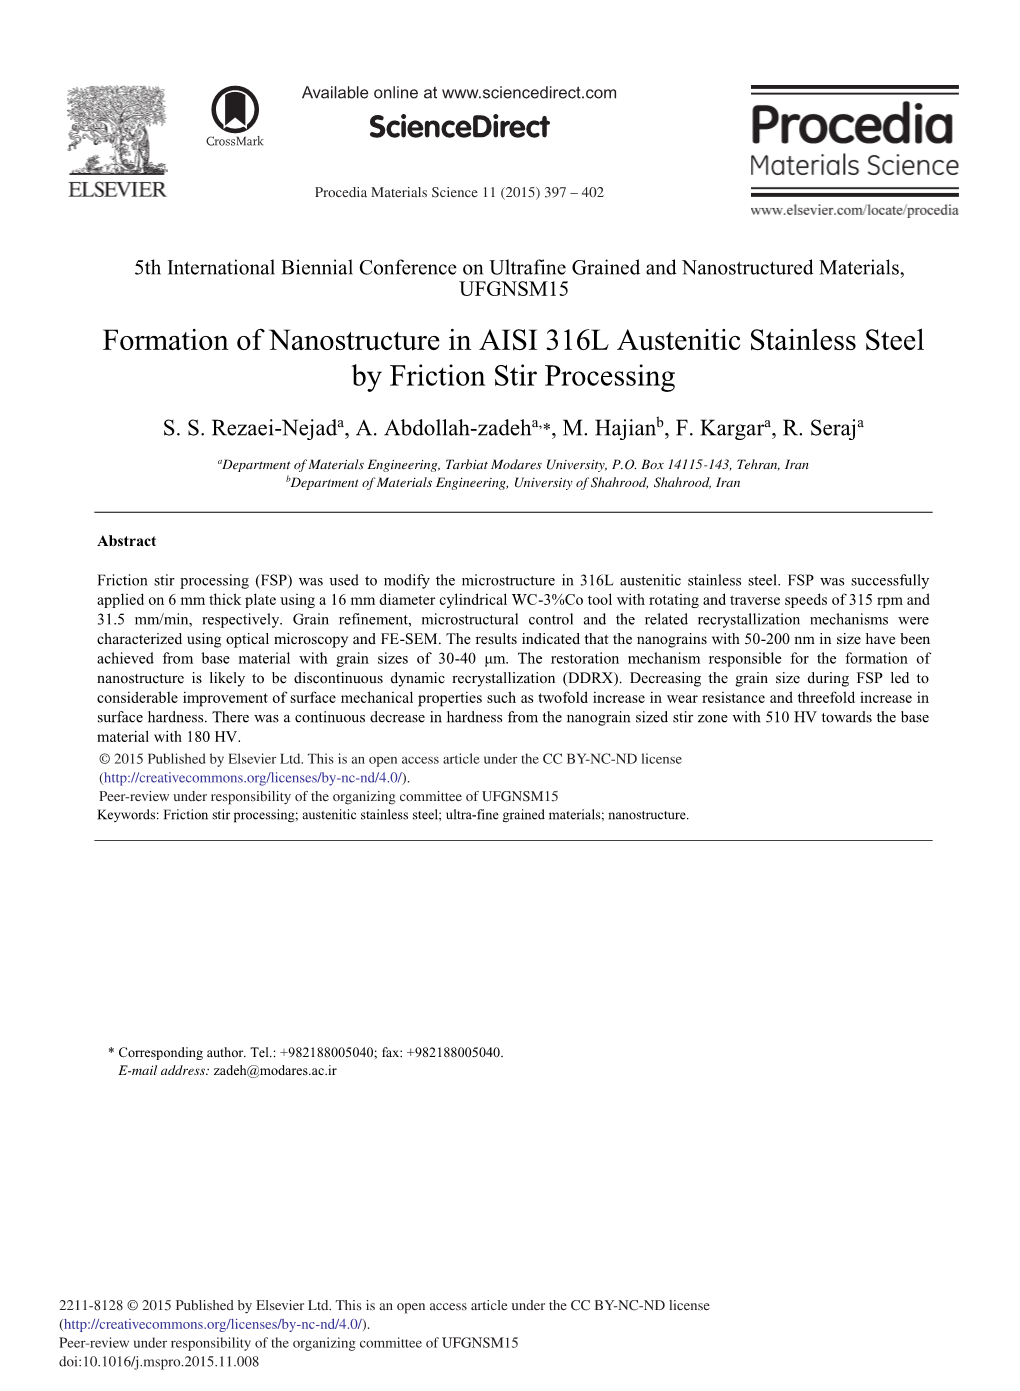 Formation of Nanostructure in AISI 316L Austenitic Stainless Steel by Friction Stir Processing